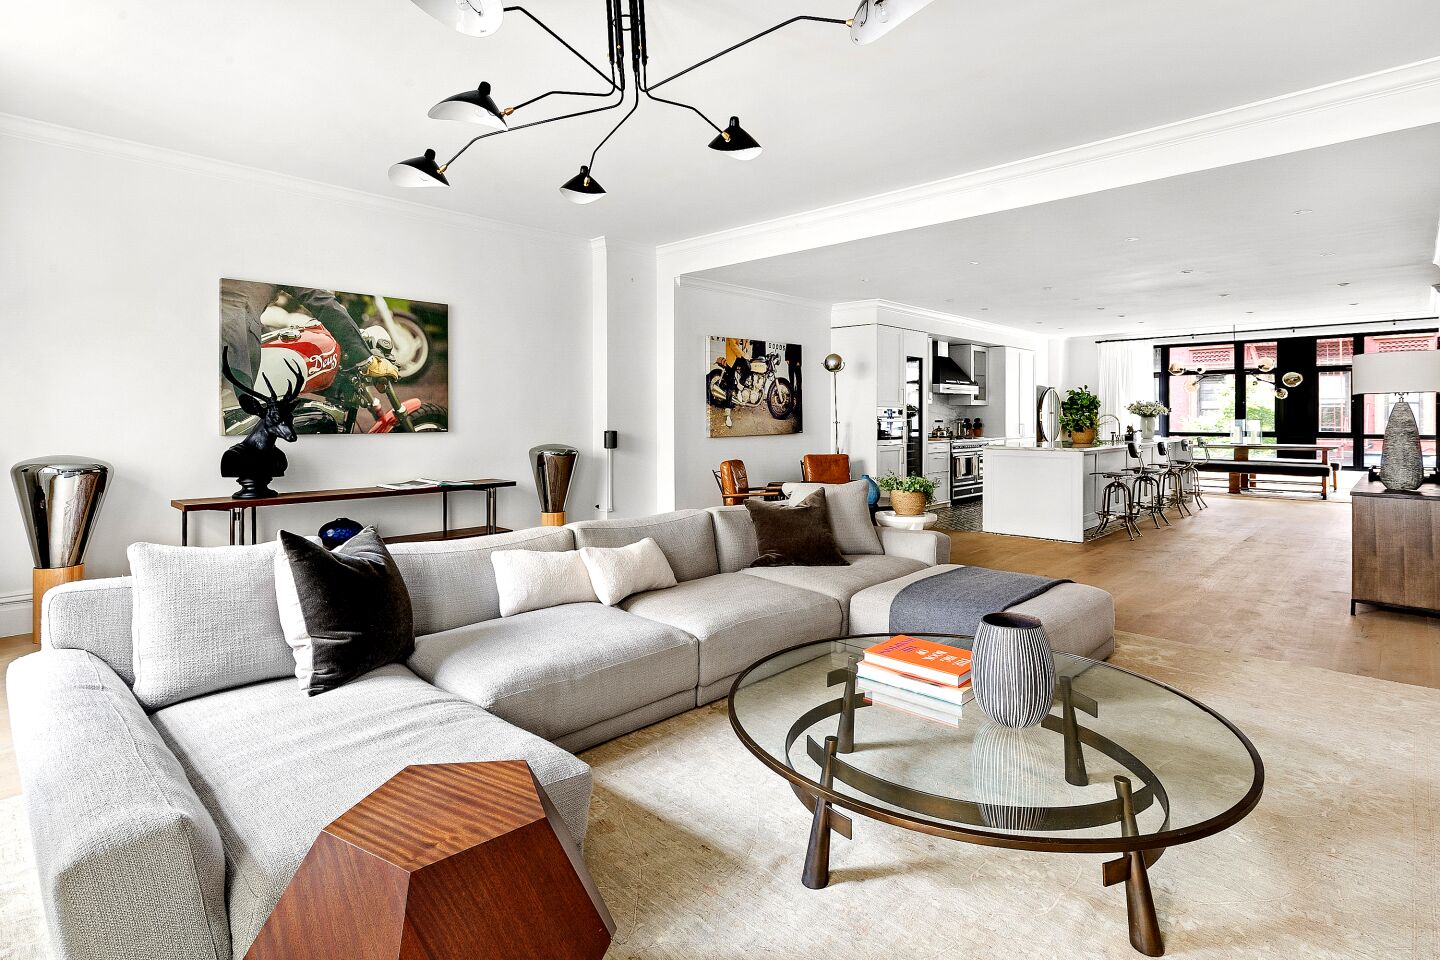 The three-bedroom condo listed by Joe Jonas and Sophie Turner includes an outdoor terrace and spans an entire floor in a boutique building in Lower Manhattan.